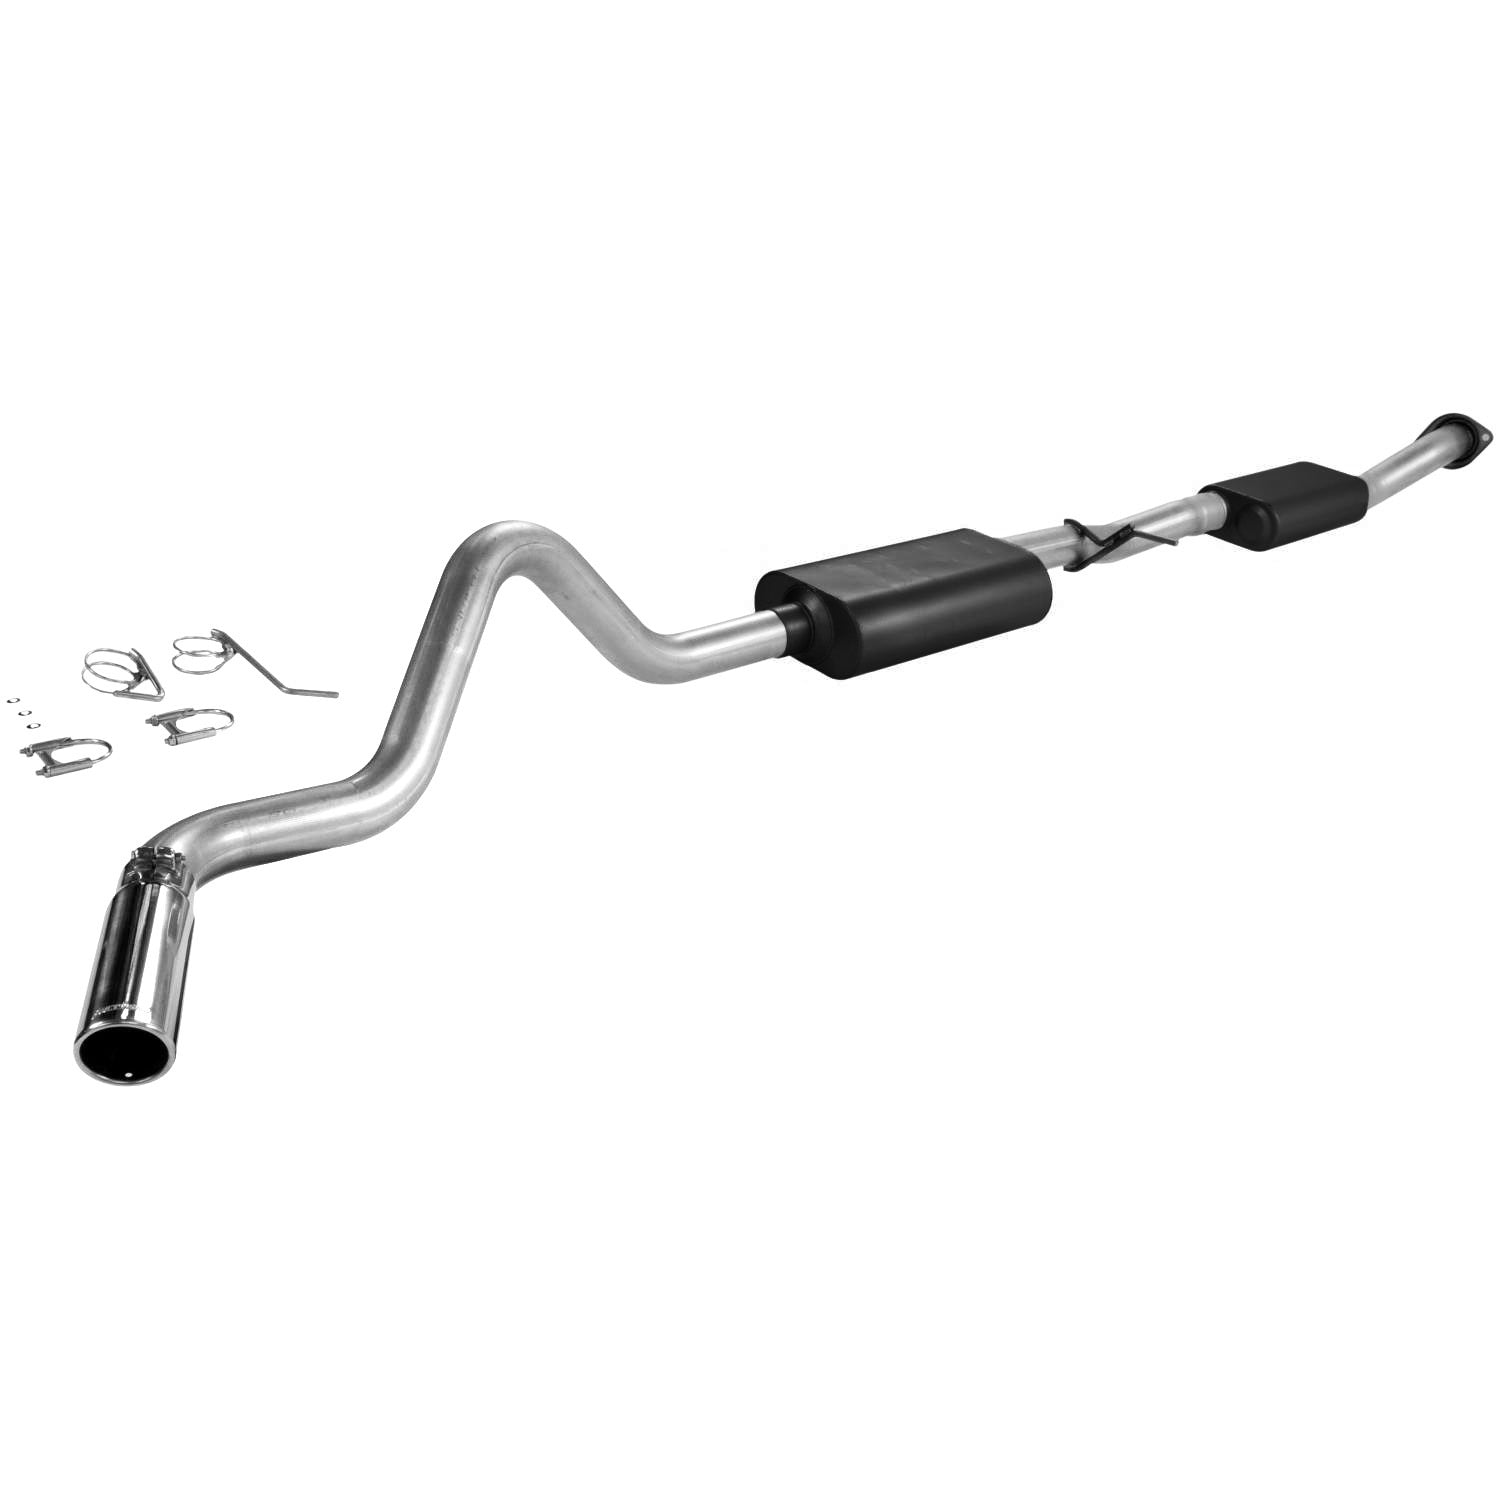 99-05 GM P/U Ext Cab SB Force II Exhaust System